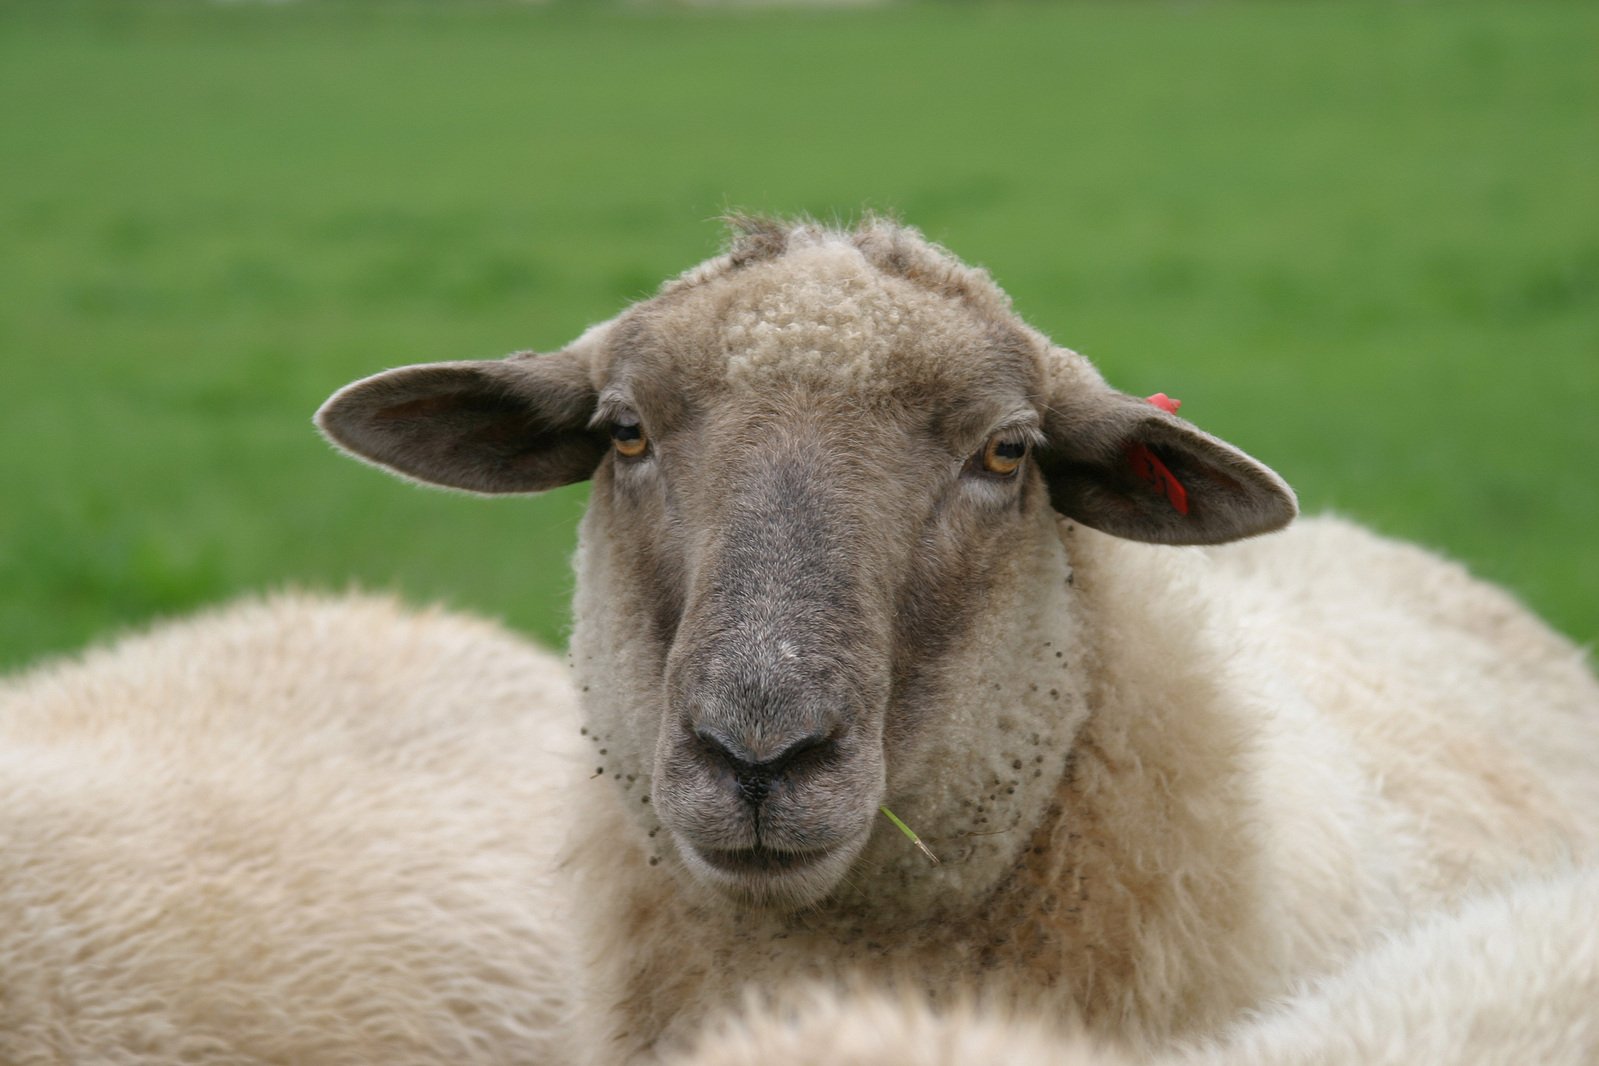 a sheep looking ahead while standing in the grass